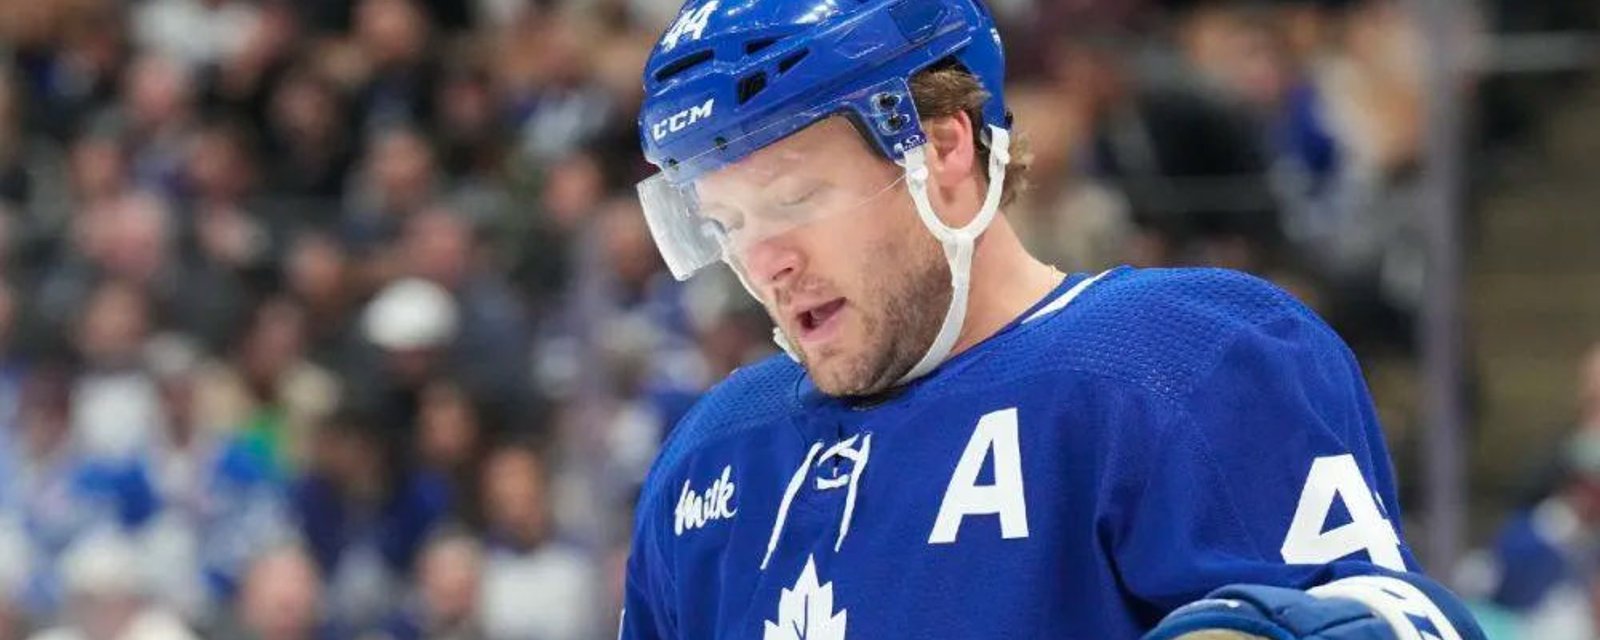 Major update in Morgan Rielly's 5 game suspension